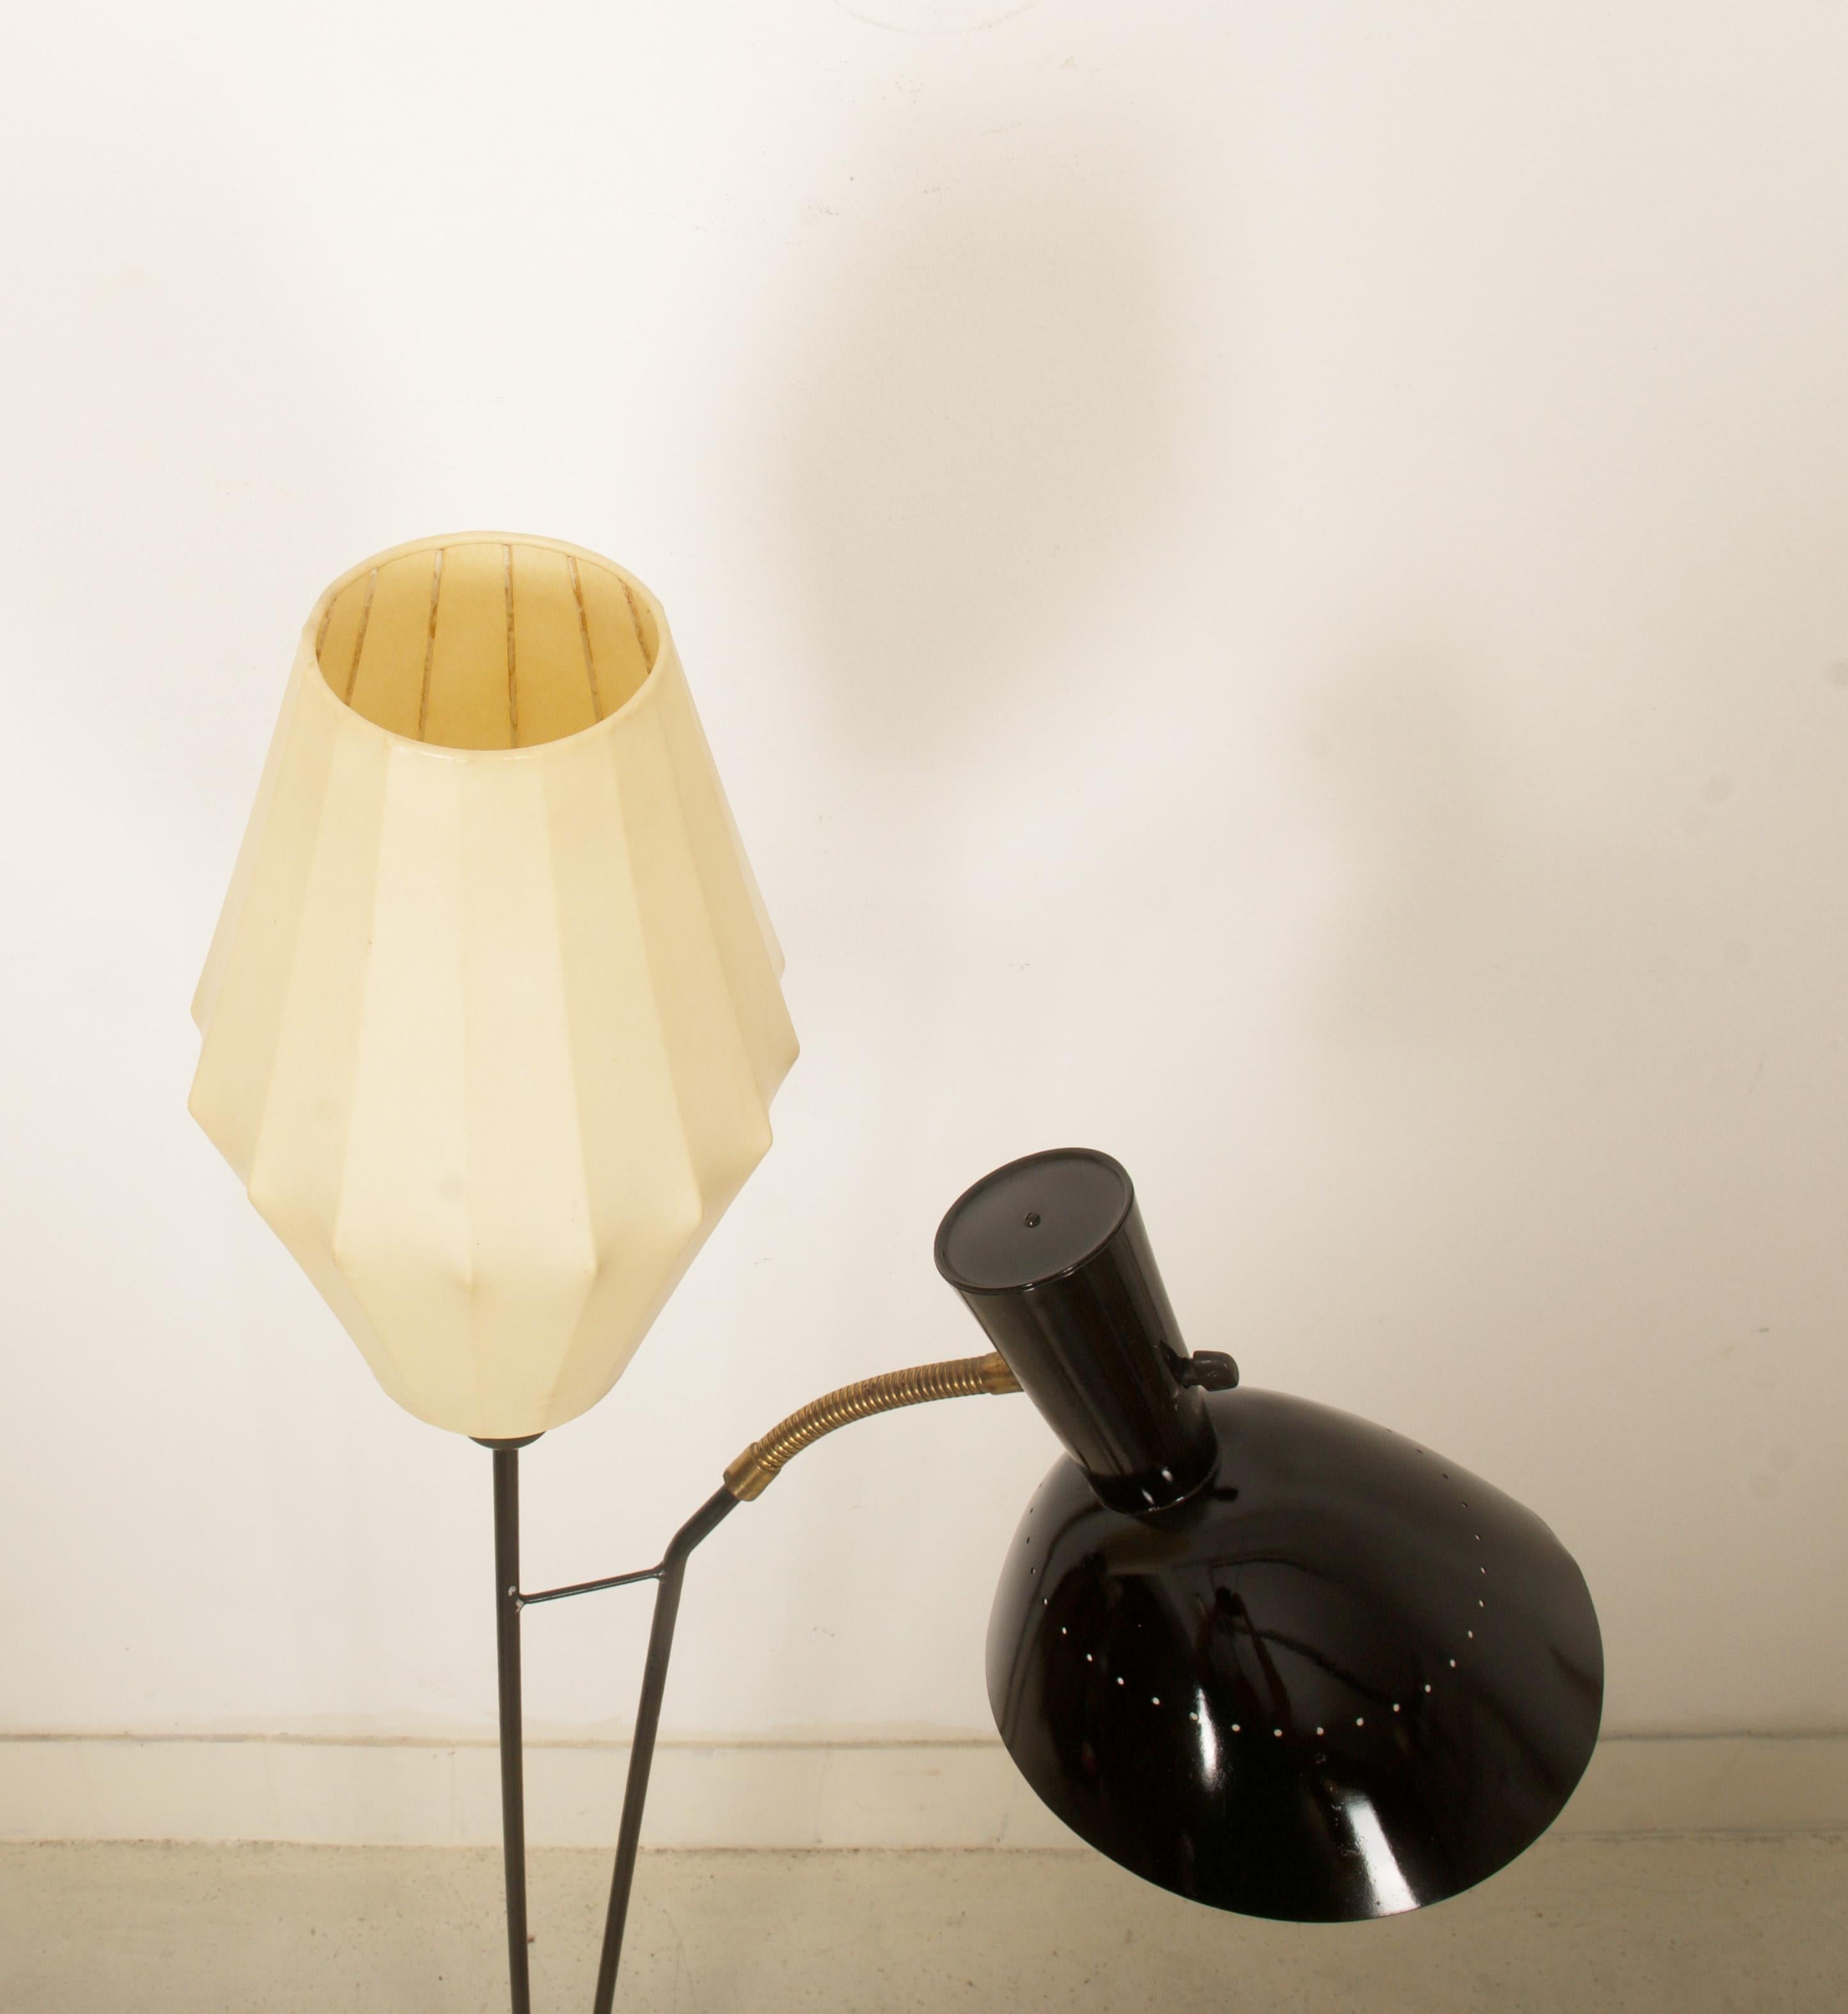 Steel Rare Floor Lamp by Hans Bergström for Ateljé Lyktan from the 1950s For Sale